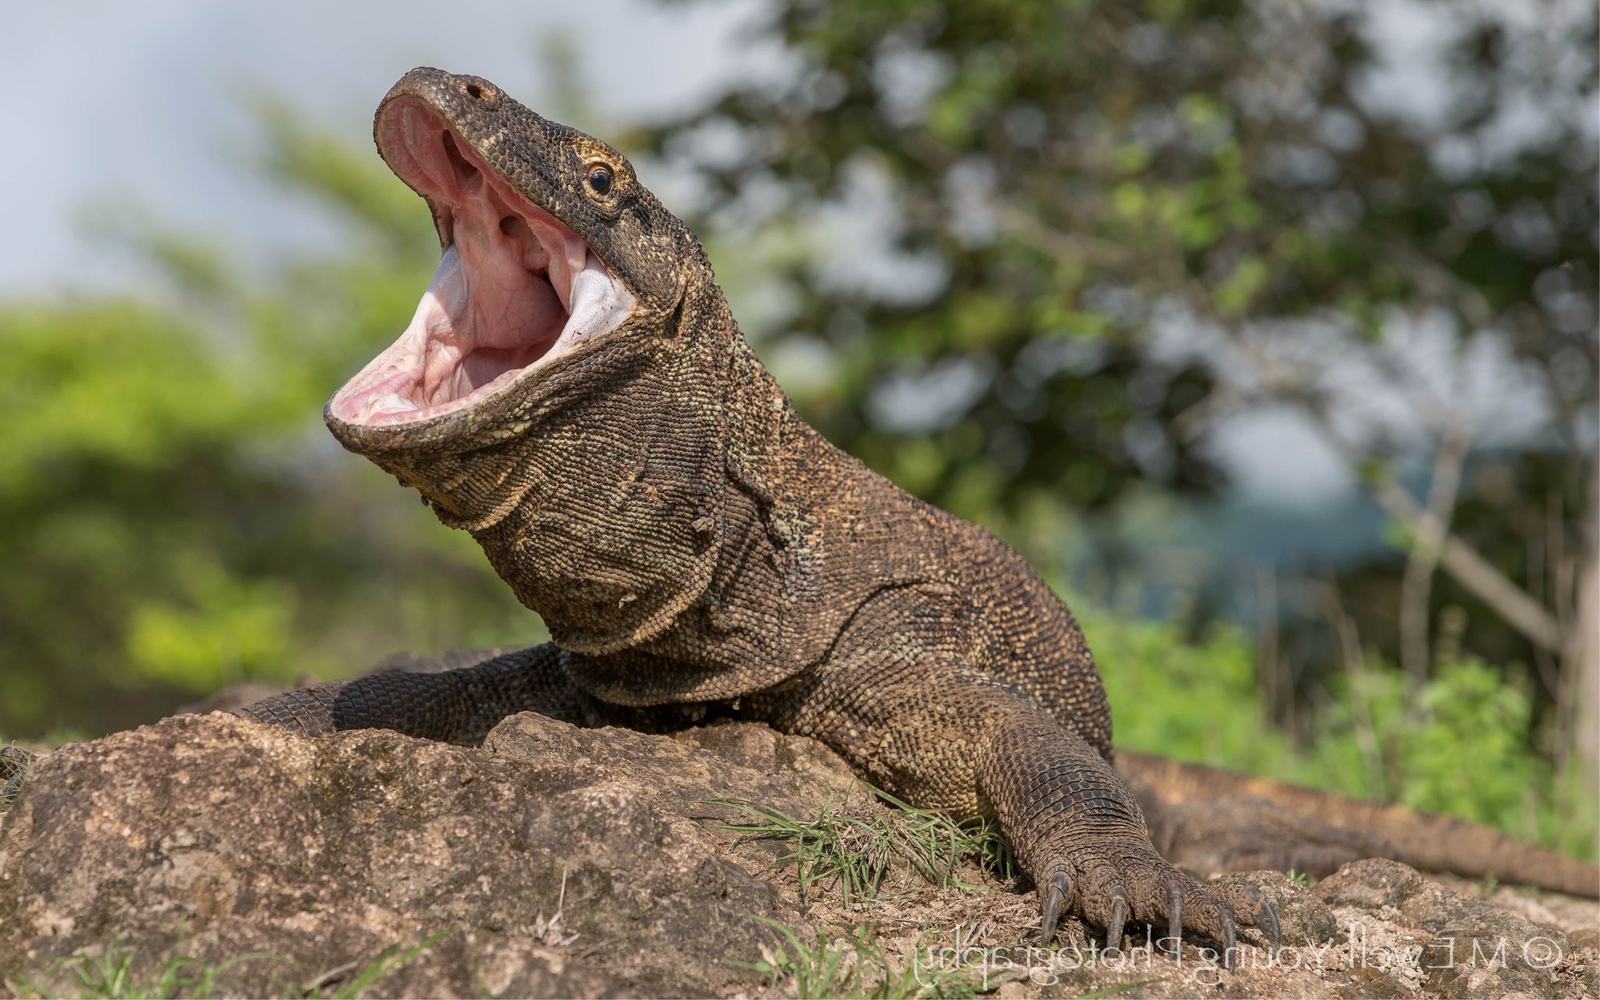 Komodo dragon that makes the locals cry in fear - My, Komodo monitor lizard, Lizard, Reptiles, Animals, Zoology, Humor, Animal book, Nature, Longpost